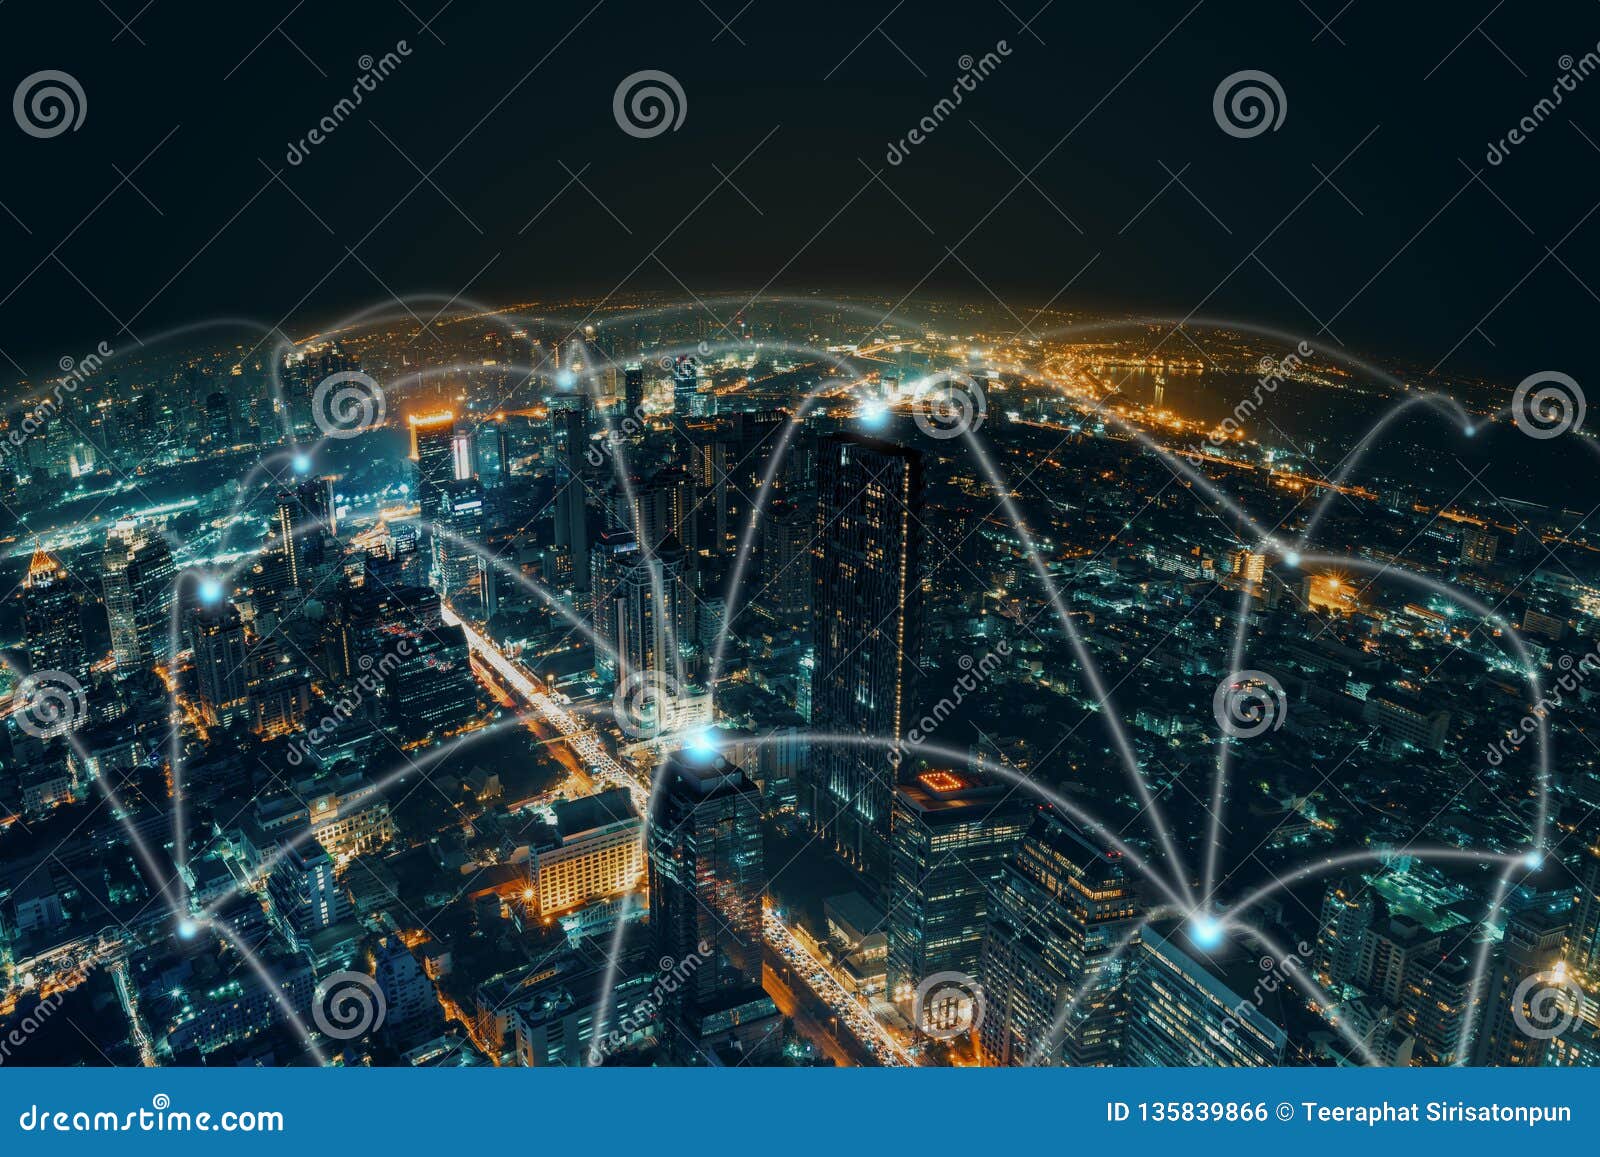 network and connection technology night city background at business center bangkok thailand. wireless skyline connection with